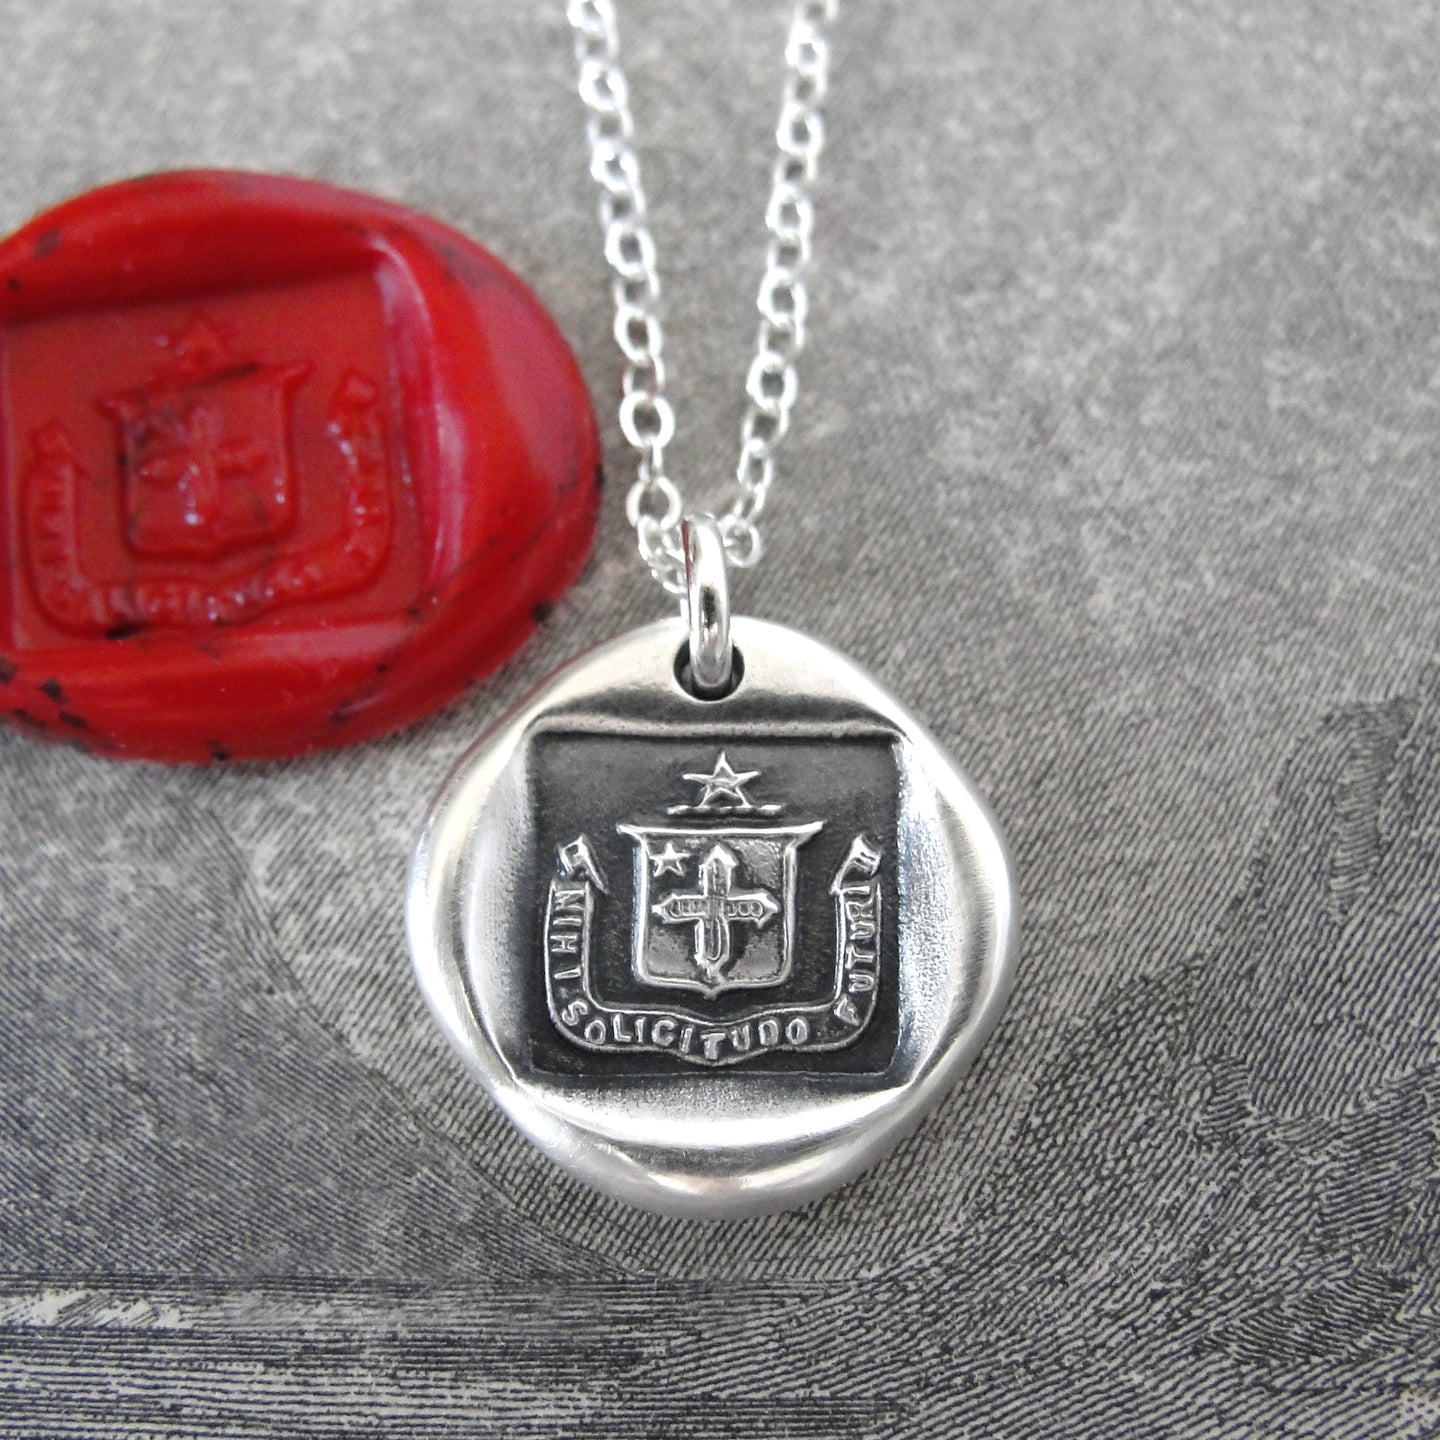 I Have A Care Of The Future - Silver Wax Seal Necklace